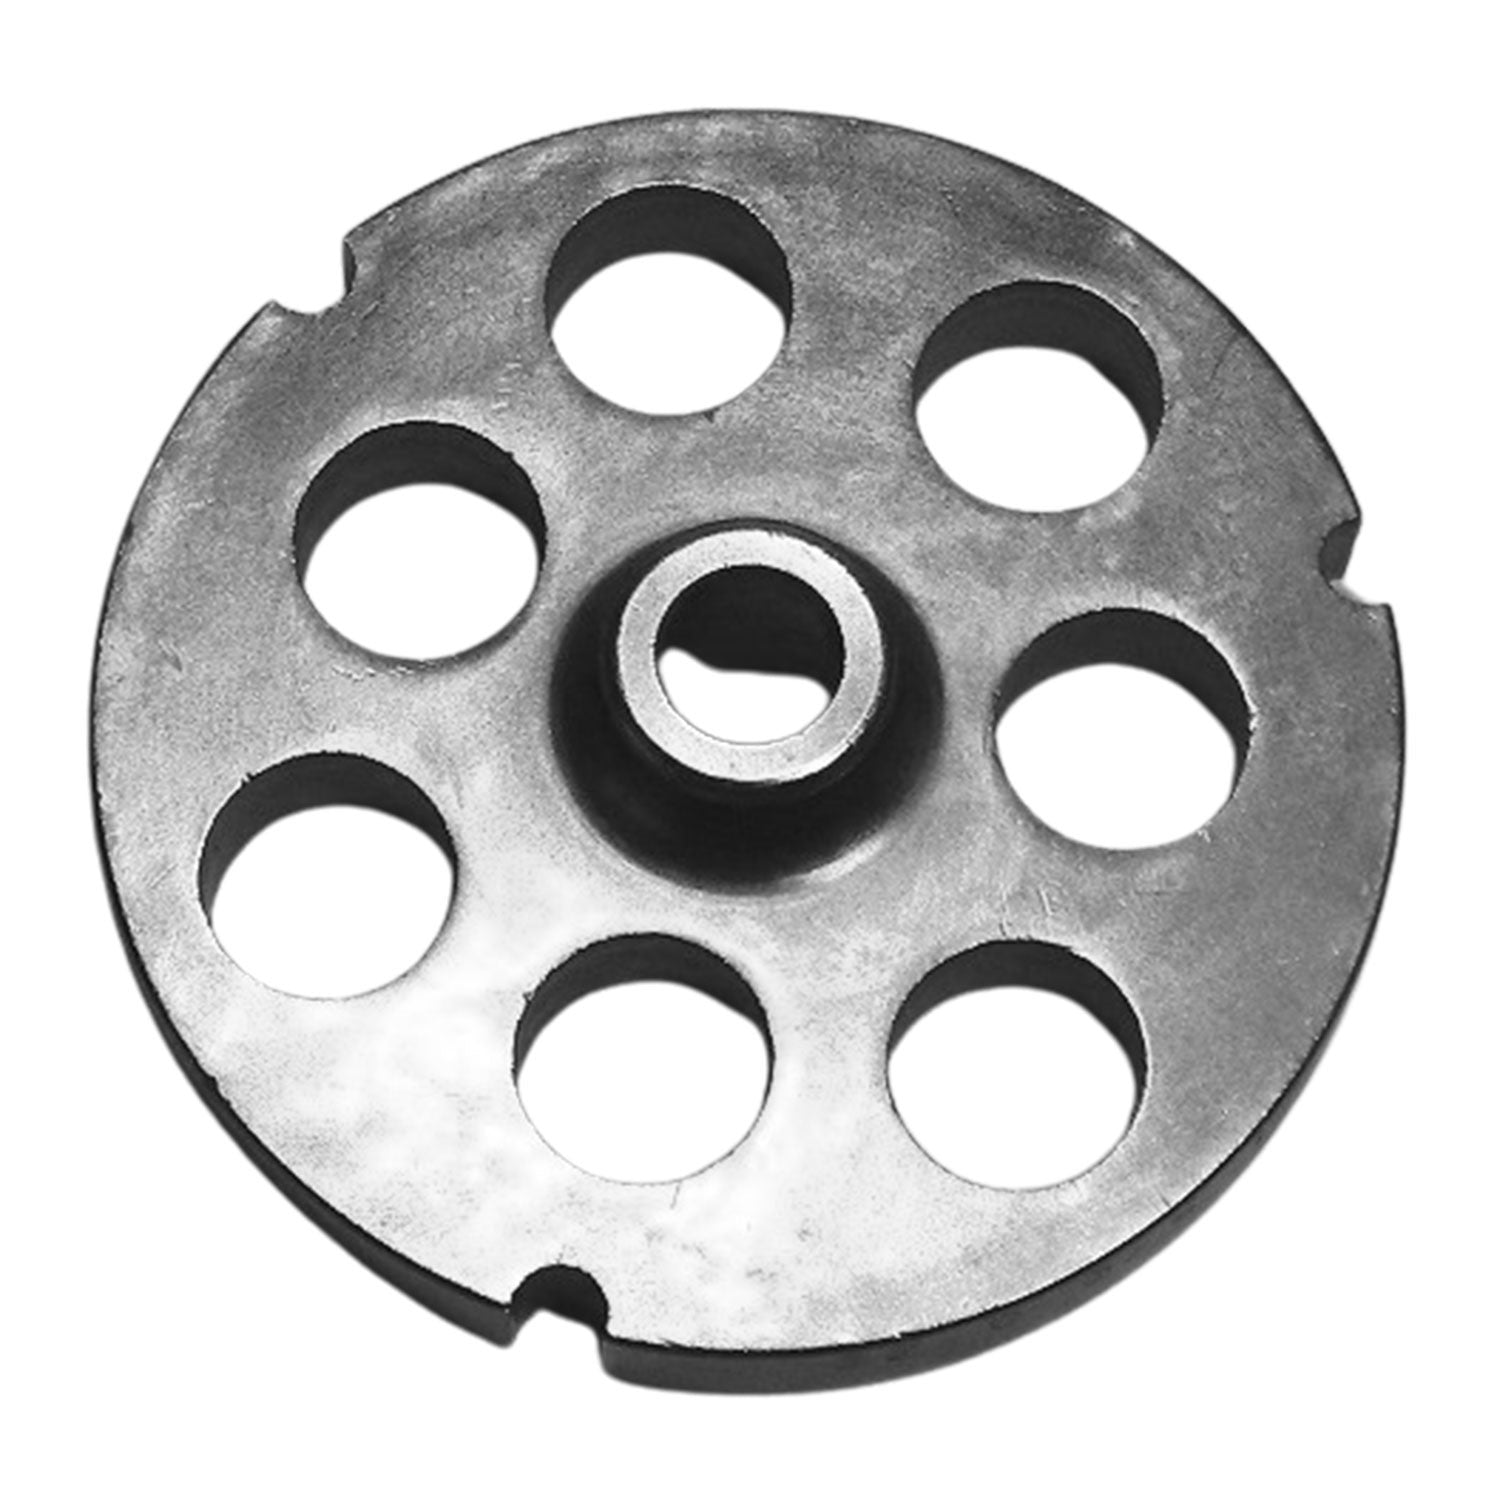 Size 32 PM Hubbed Meat Grinder Plate, 3/4